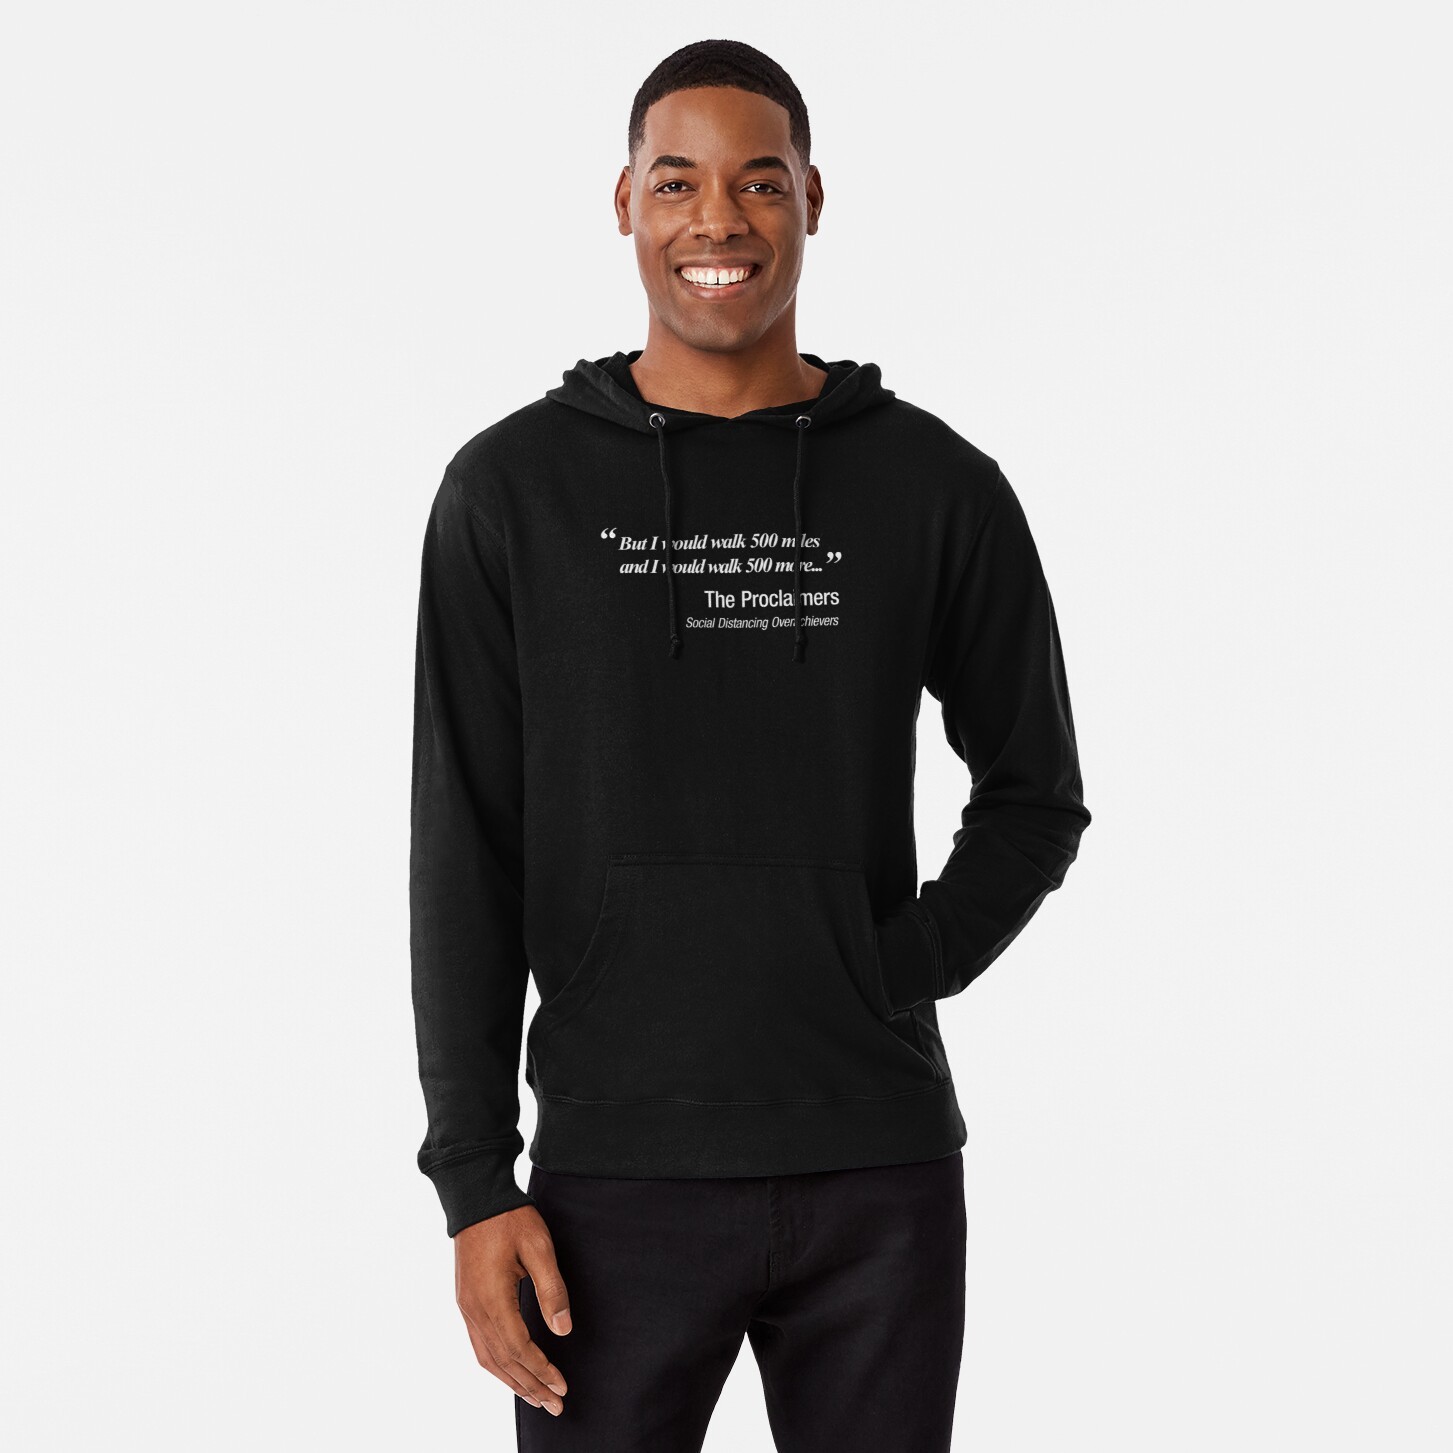 I would walk 500 miles.  Proclaimers Social Distancing Parody  Lightweight hoodie - 